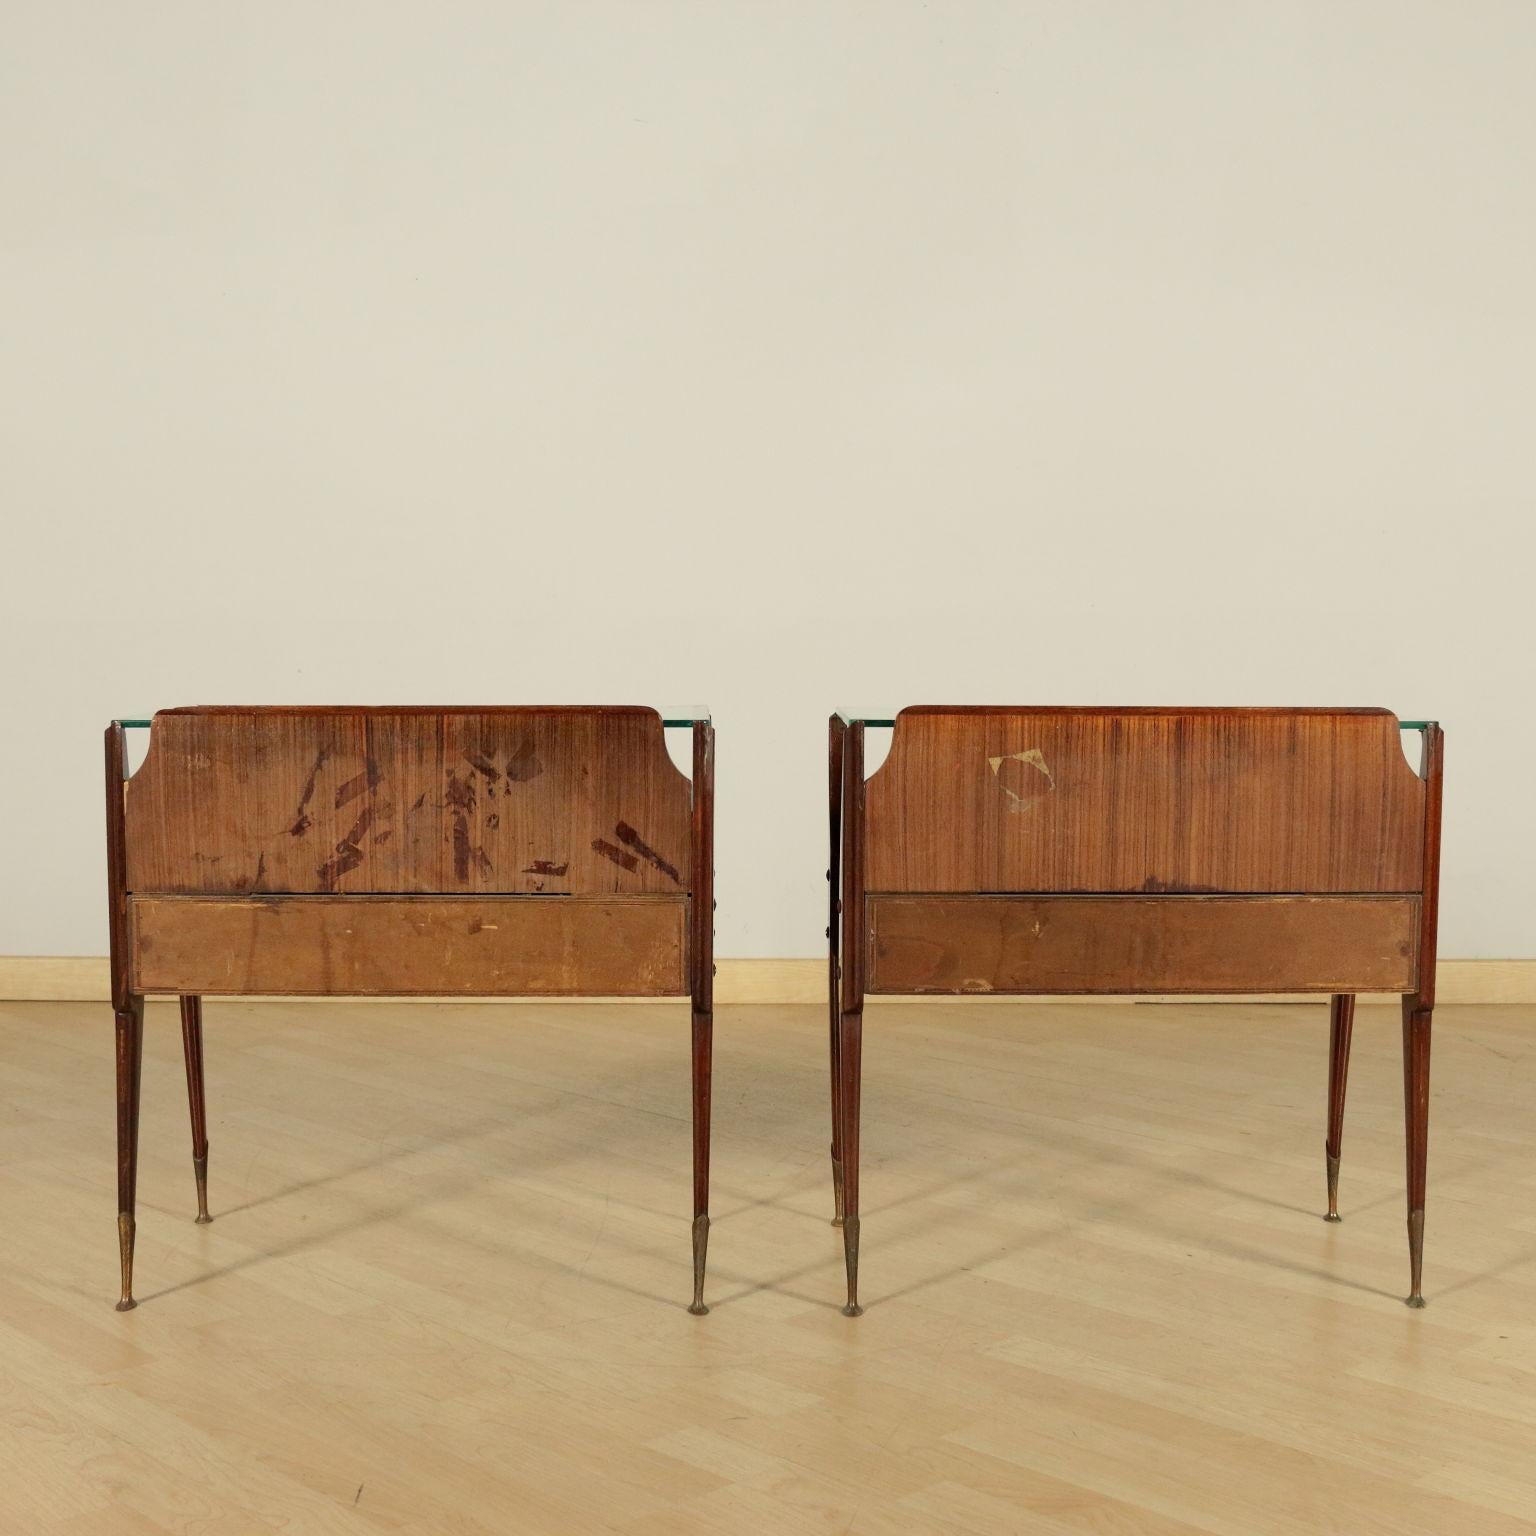 Bedside Tables, wood, Back-Treated Glass Brass, Italy, 1950s-1960s 3